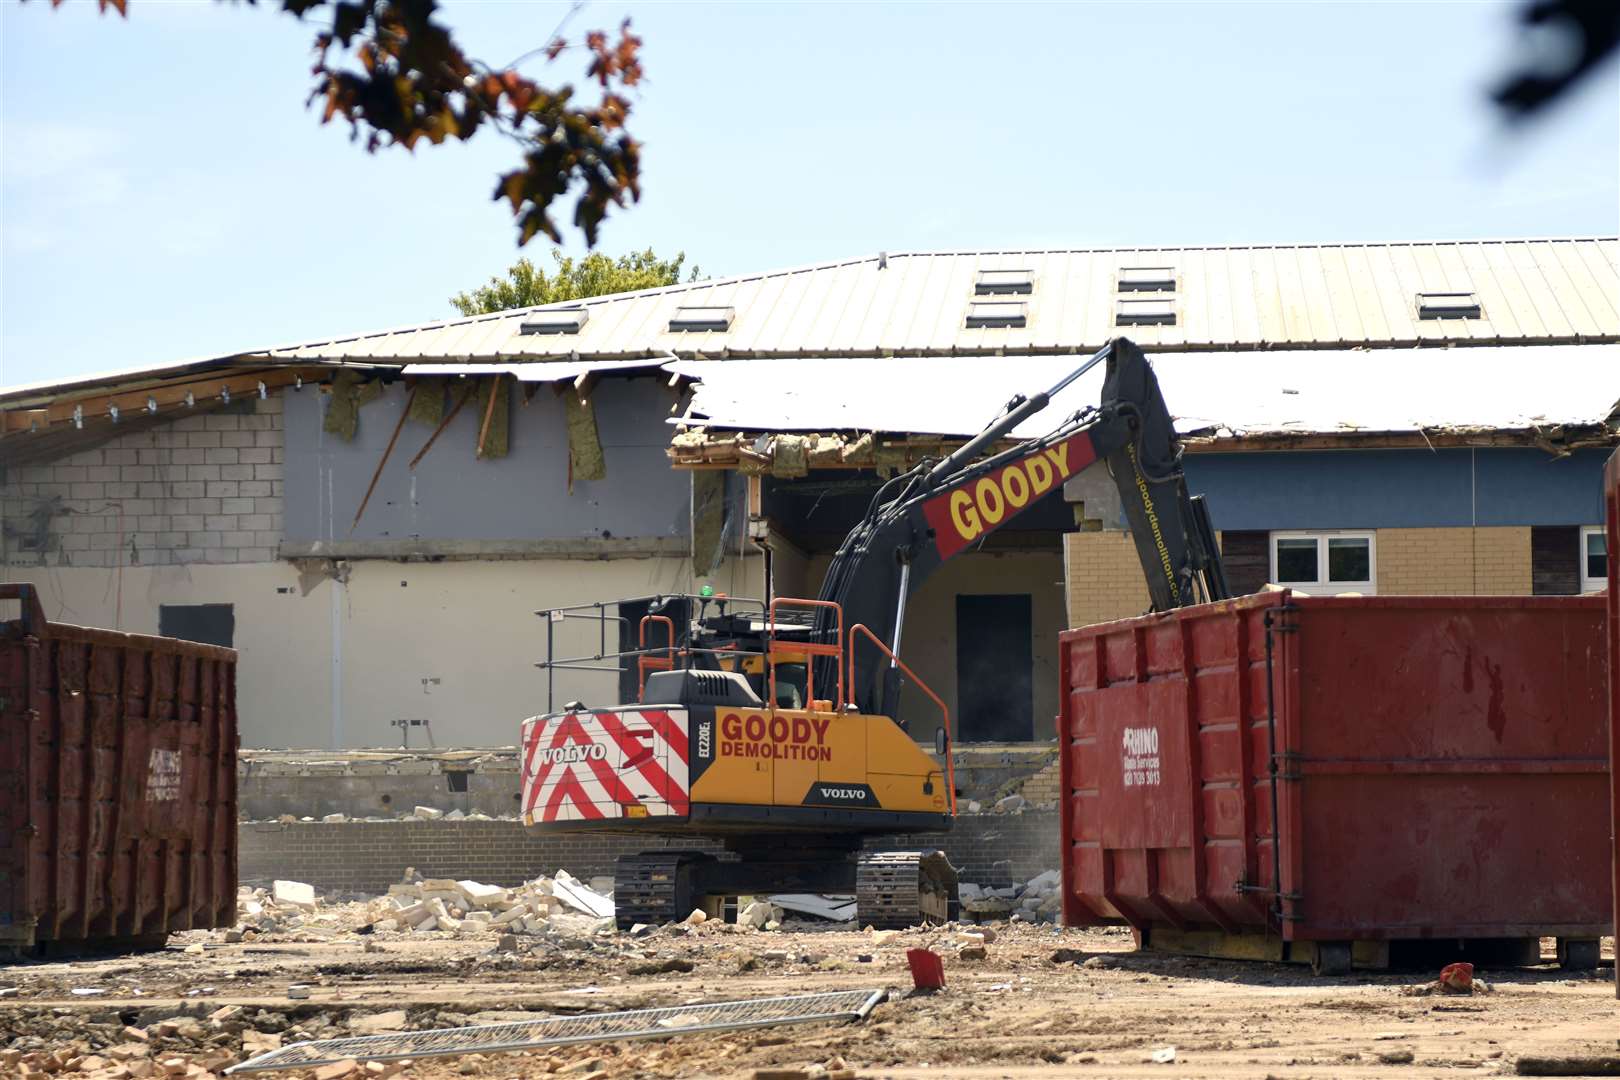 The former Chaucer site pictured on Monday. Pic: Barry Goodwin